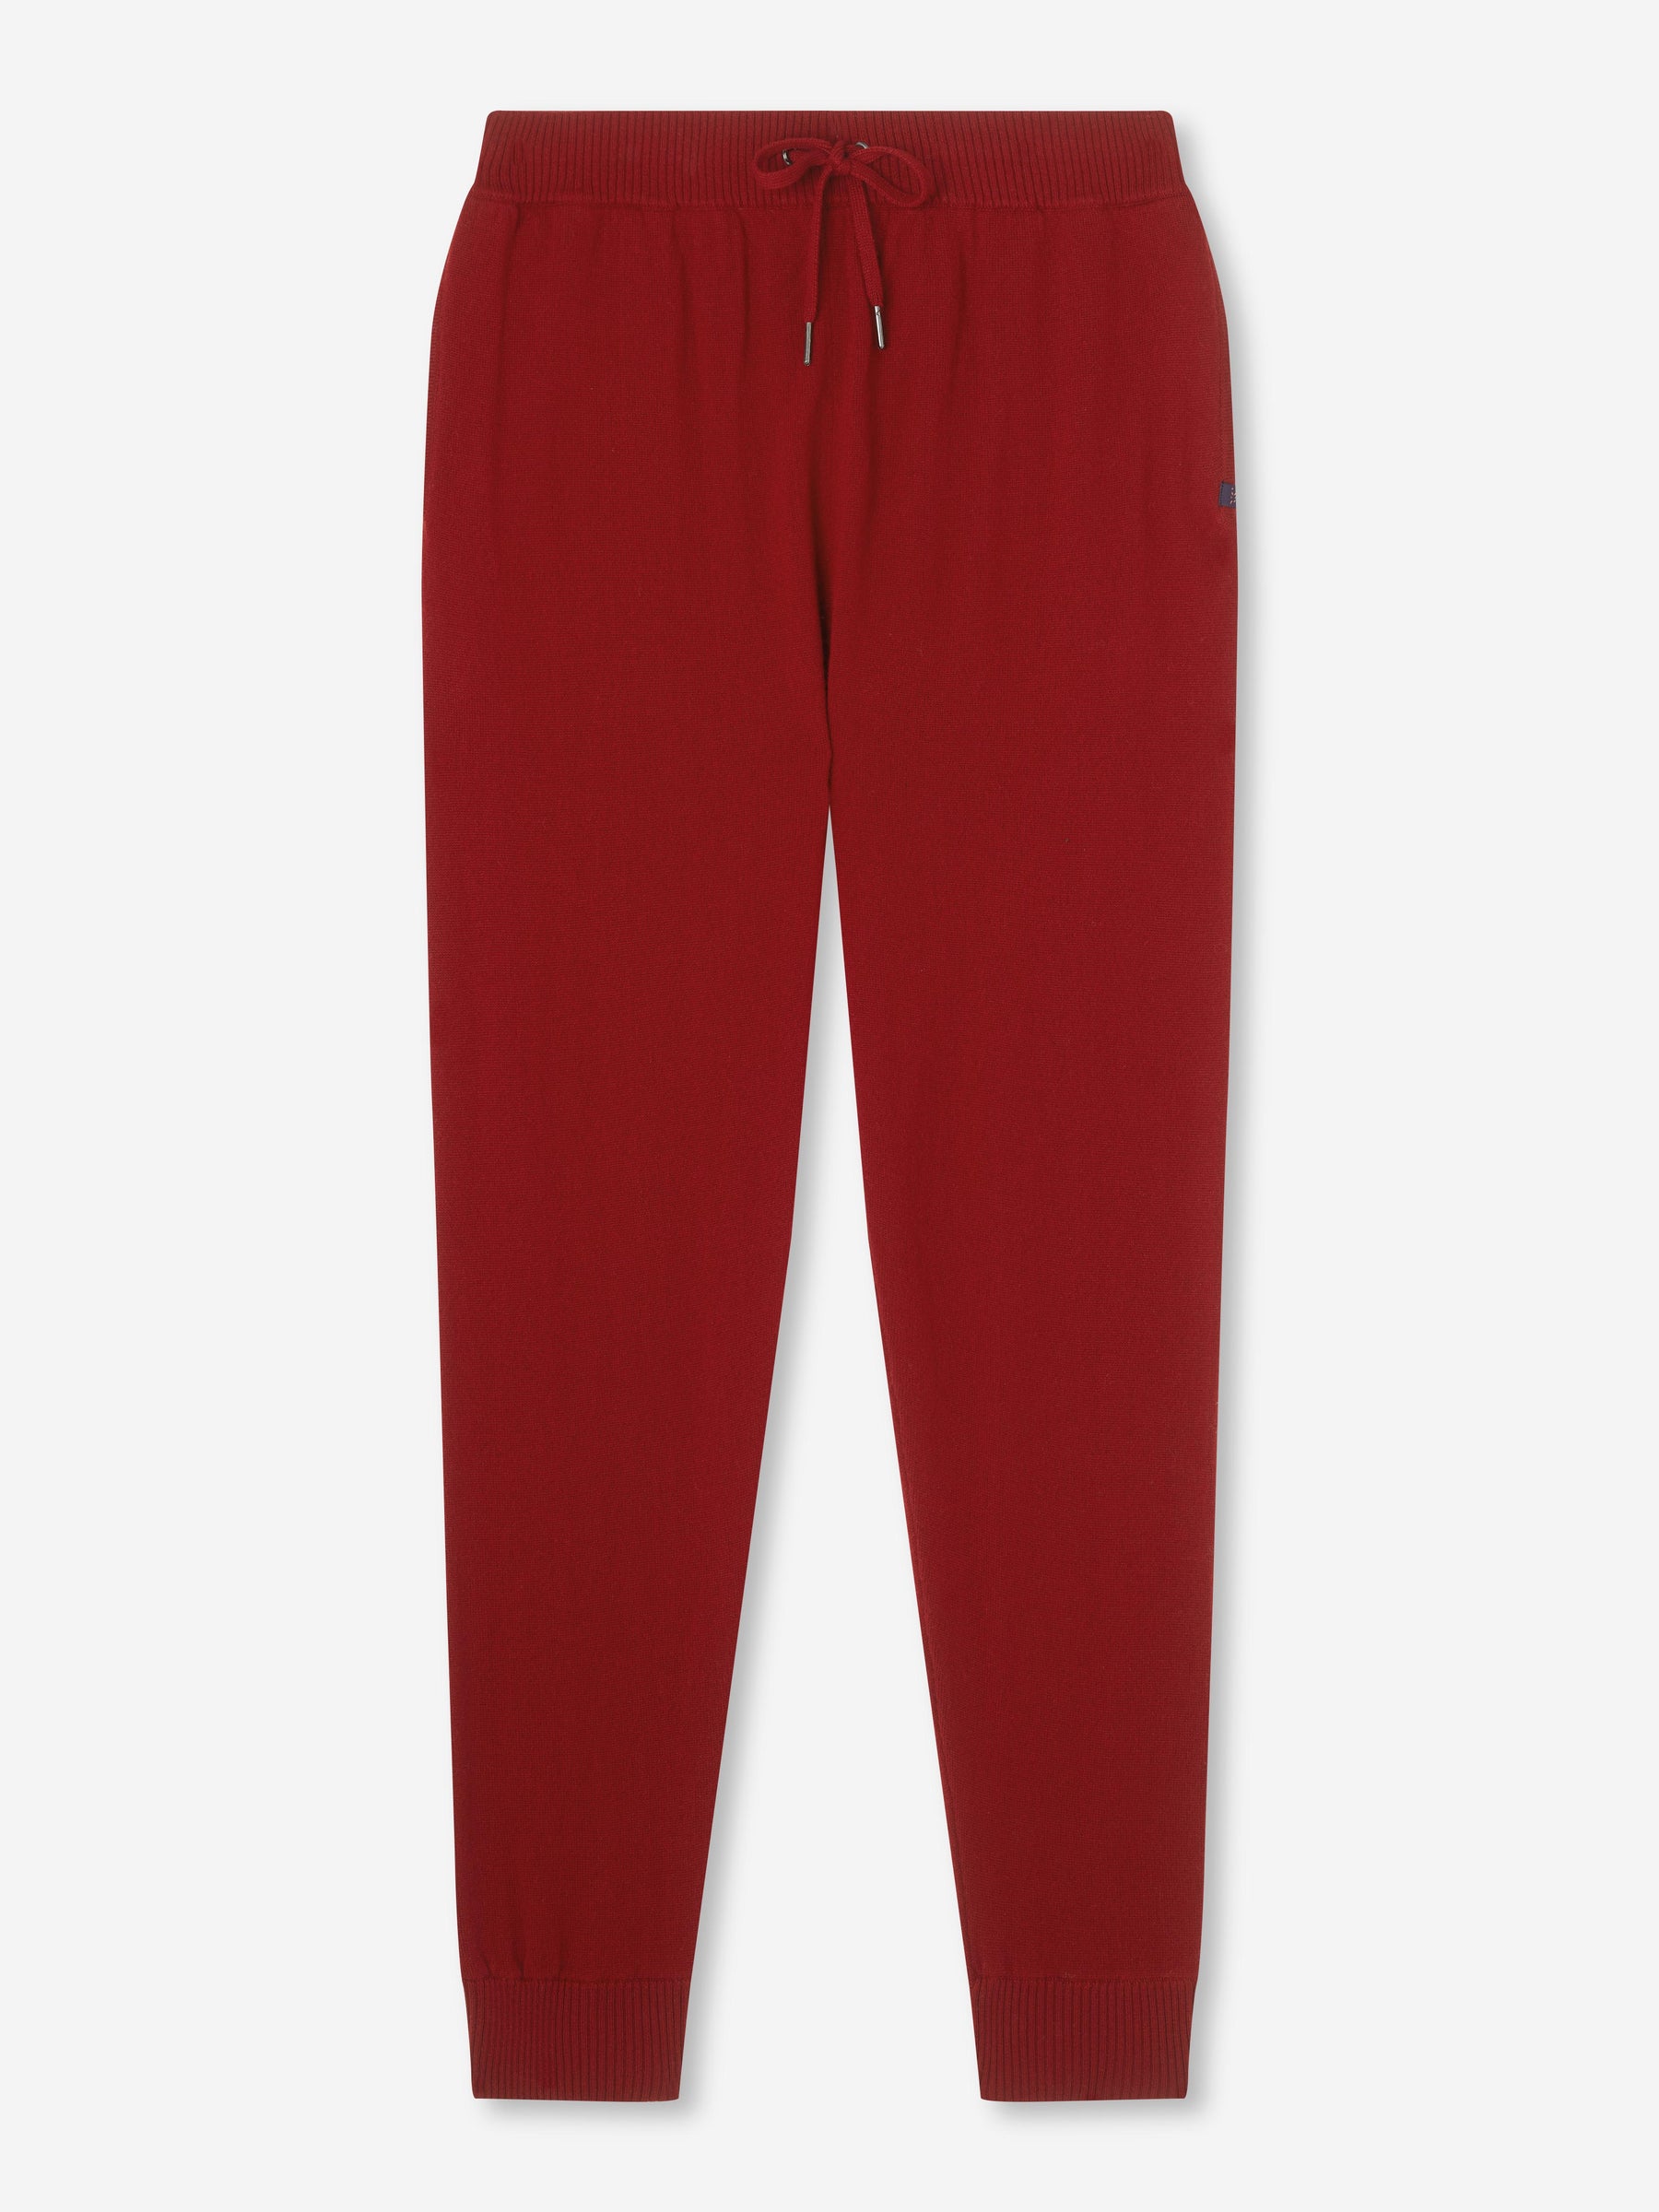 Men's Track Pants Finley 10 Cashmere Red